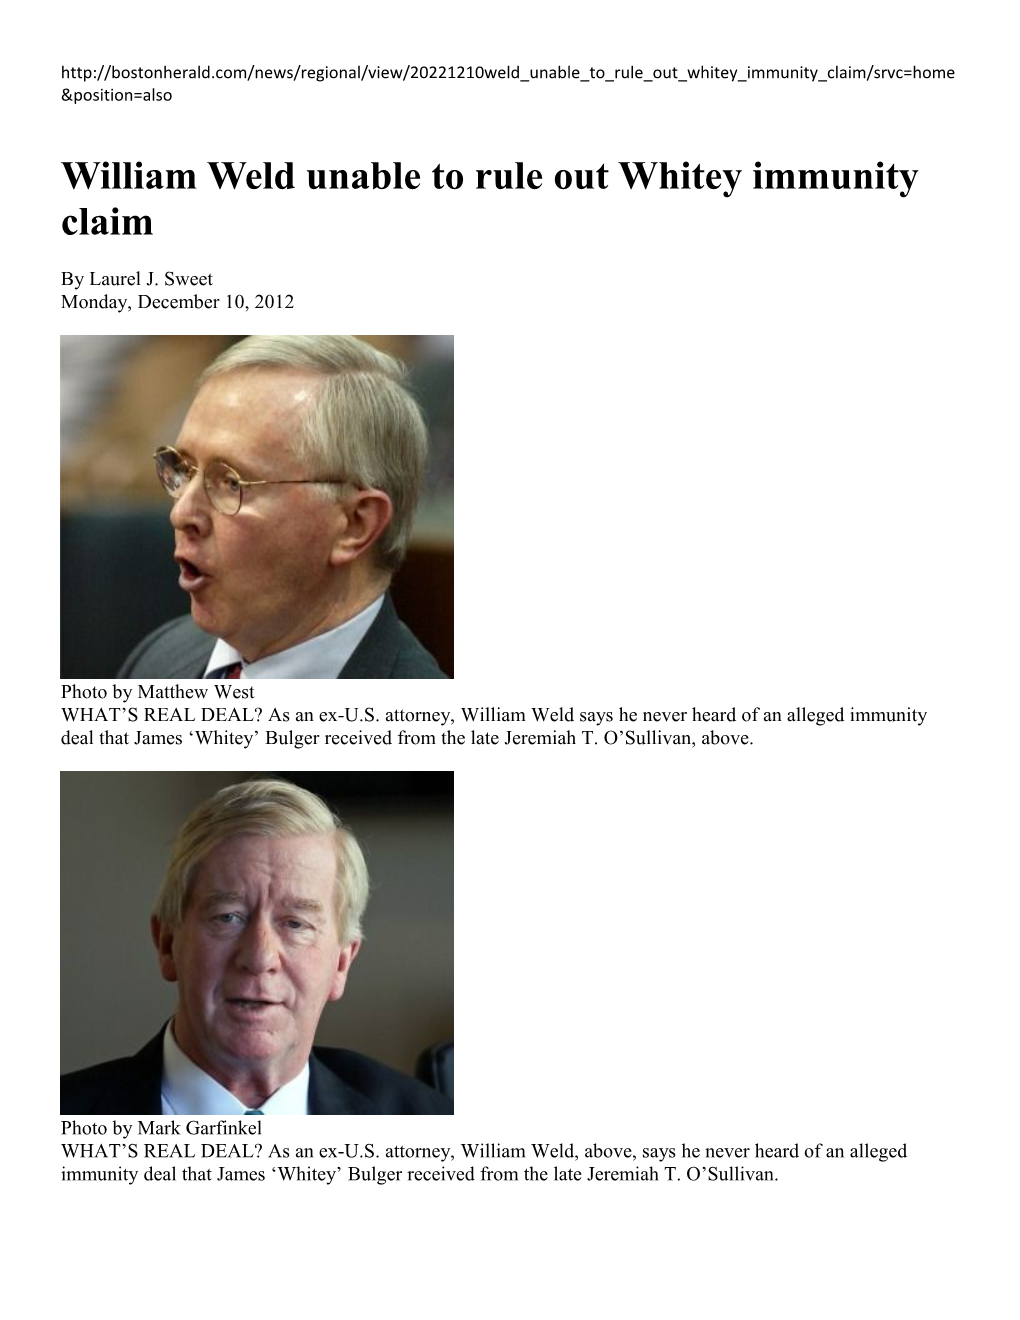 William Weld Unable to Rule out Whitey Immunity Claim